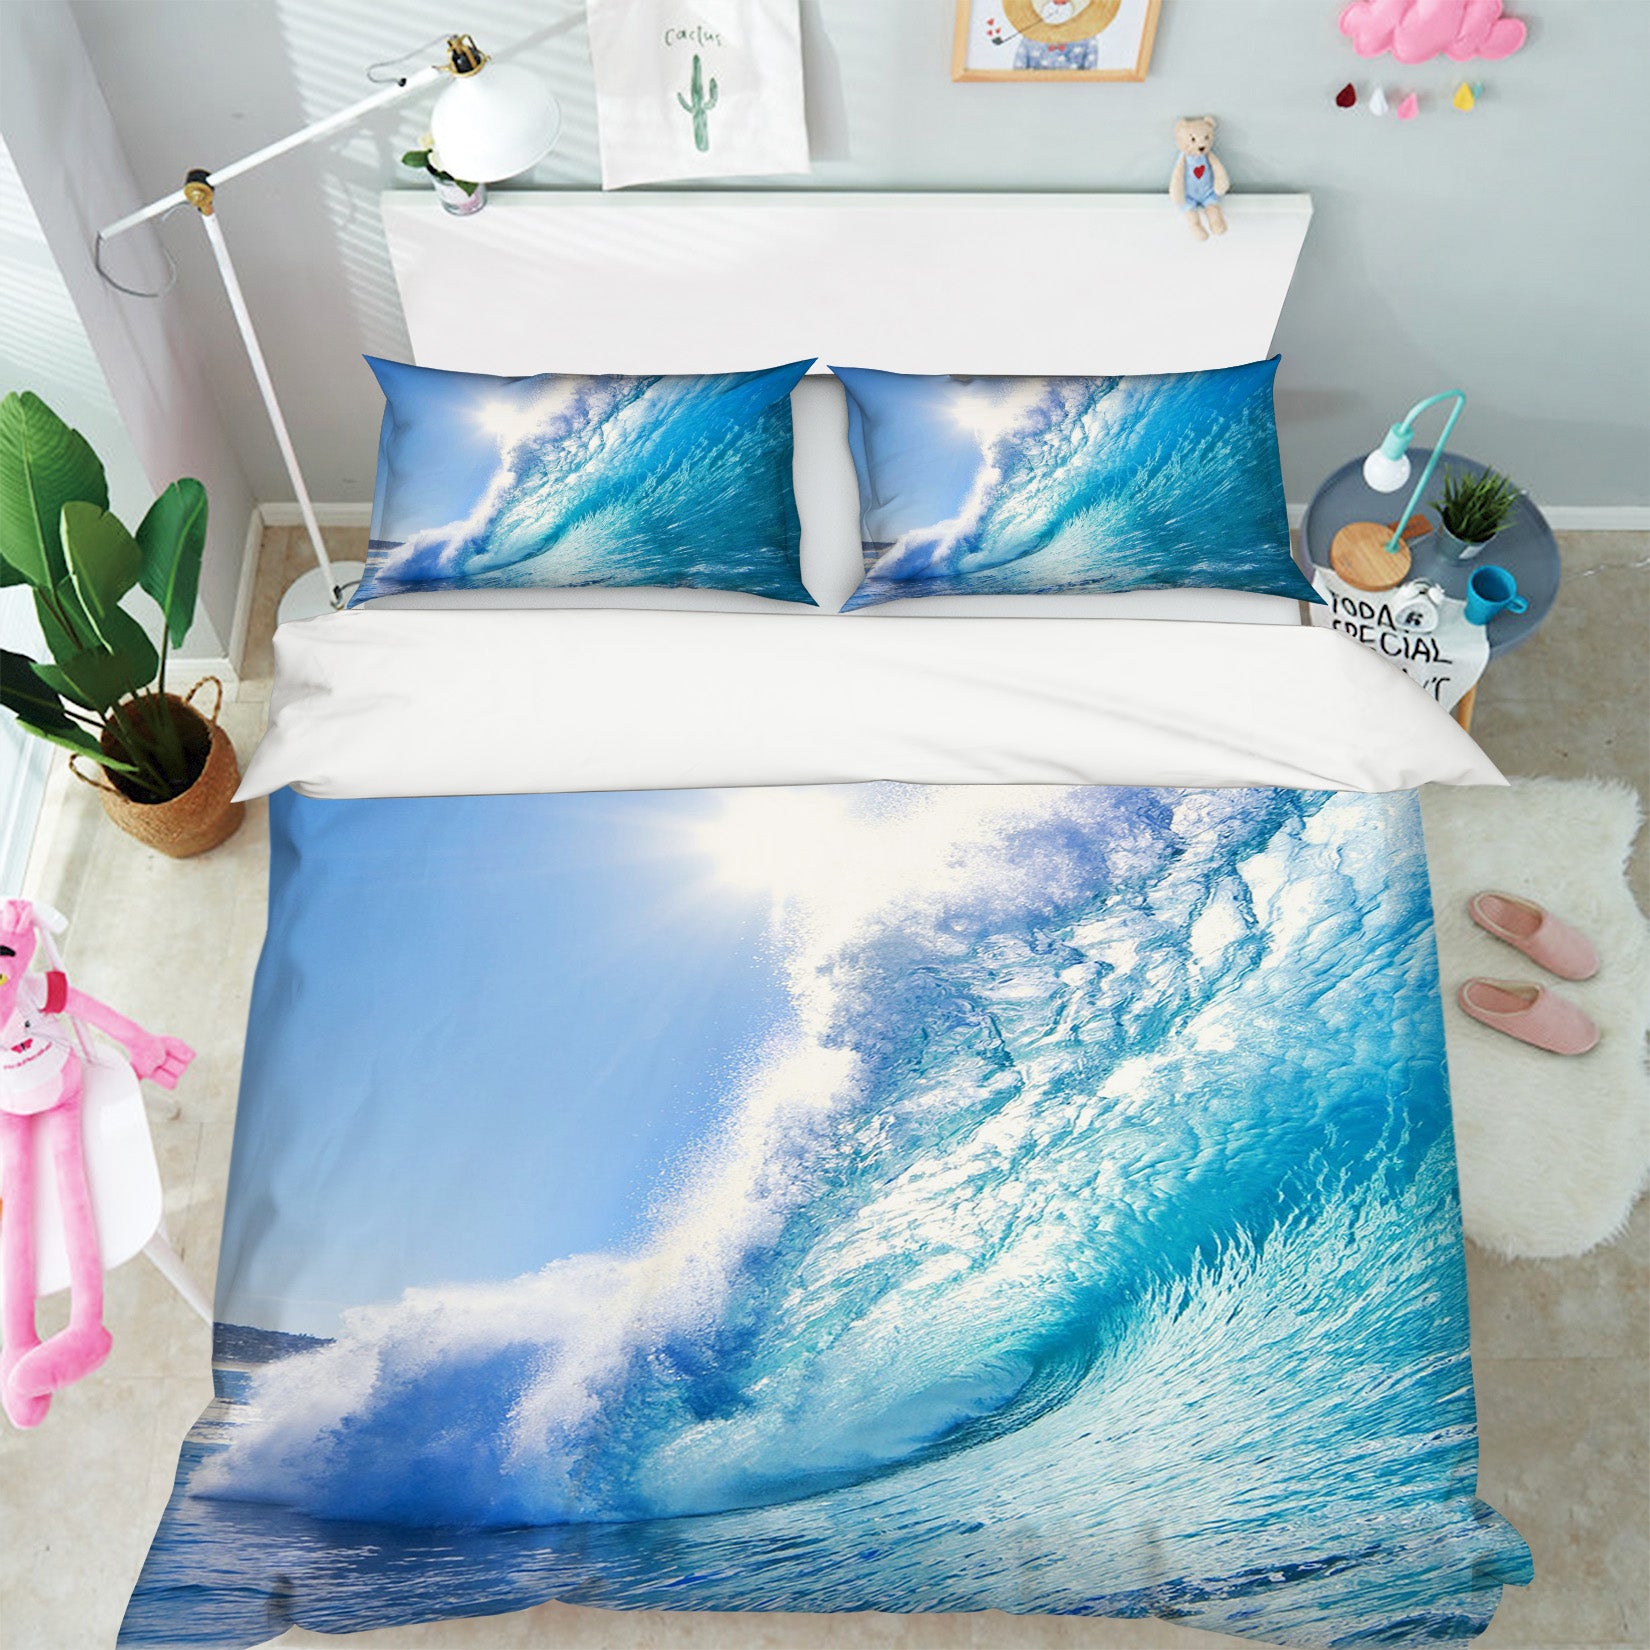 3D Sun And Waves 059 Bed Pillowcases Quilt